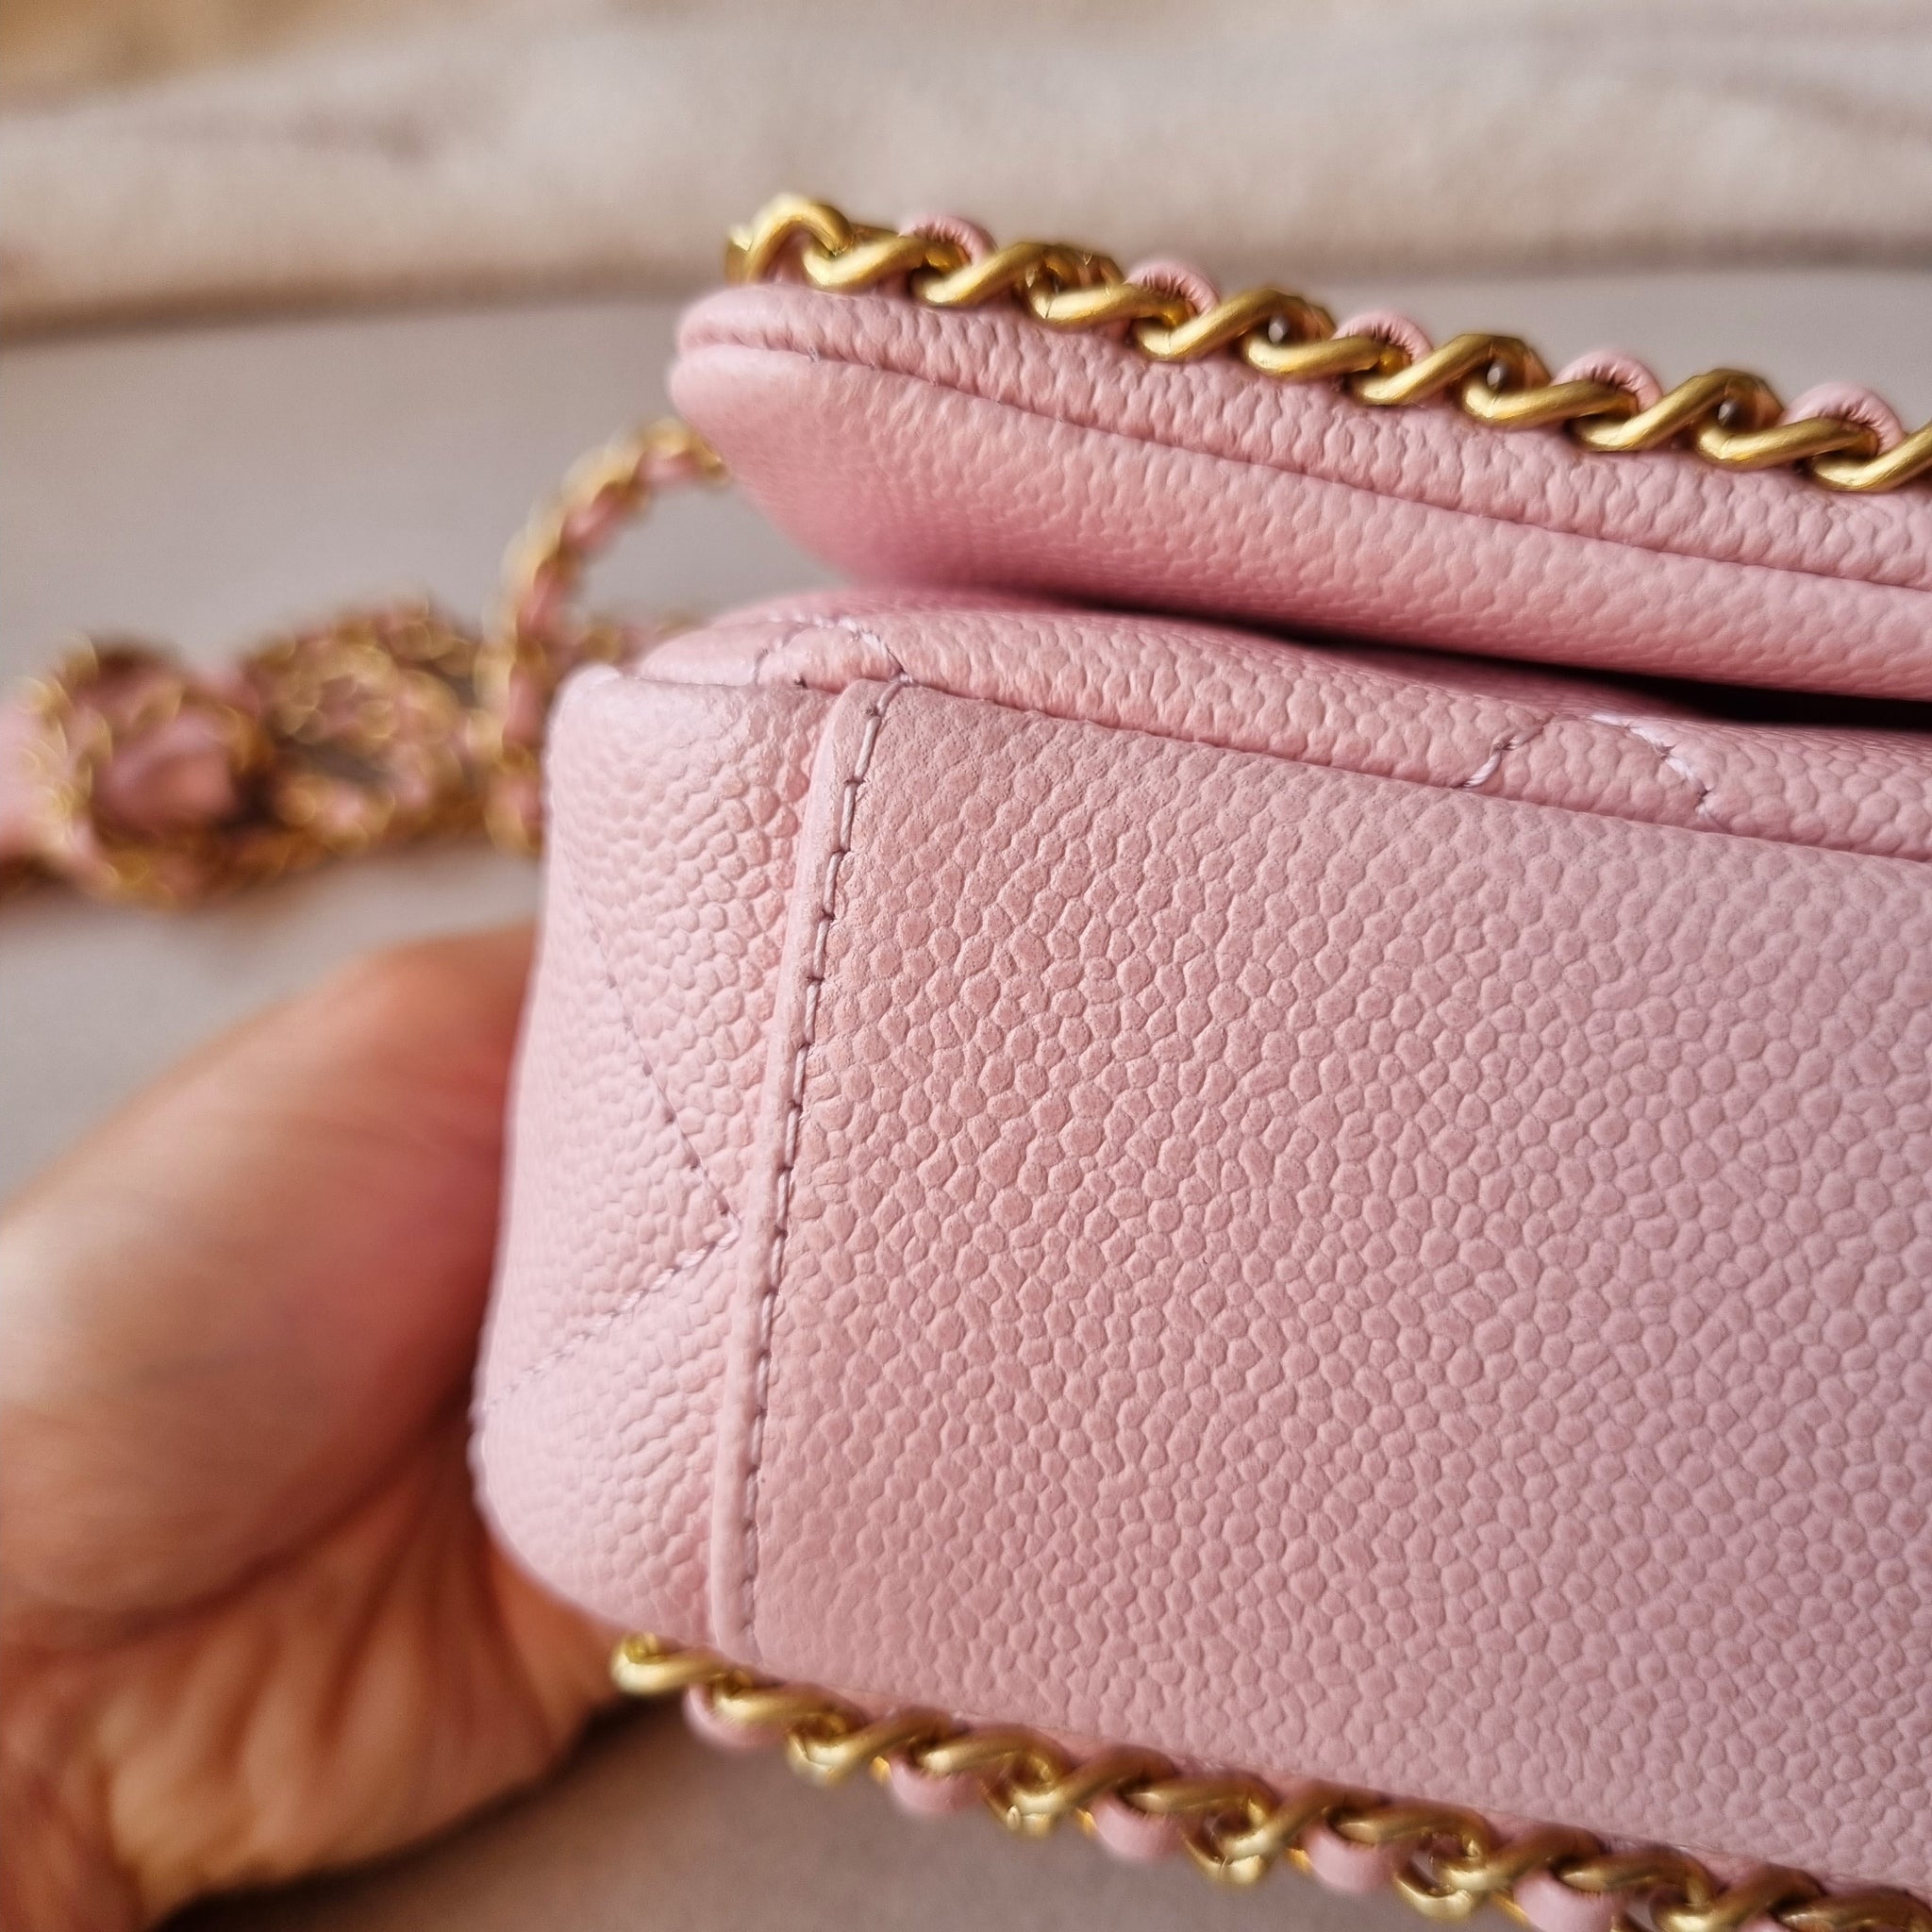 Chanel Zipped Key Holder Case 22K Pink Quilted Caviar Light gold